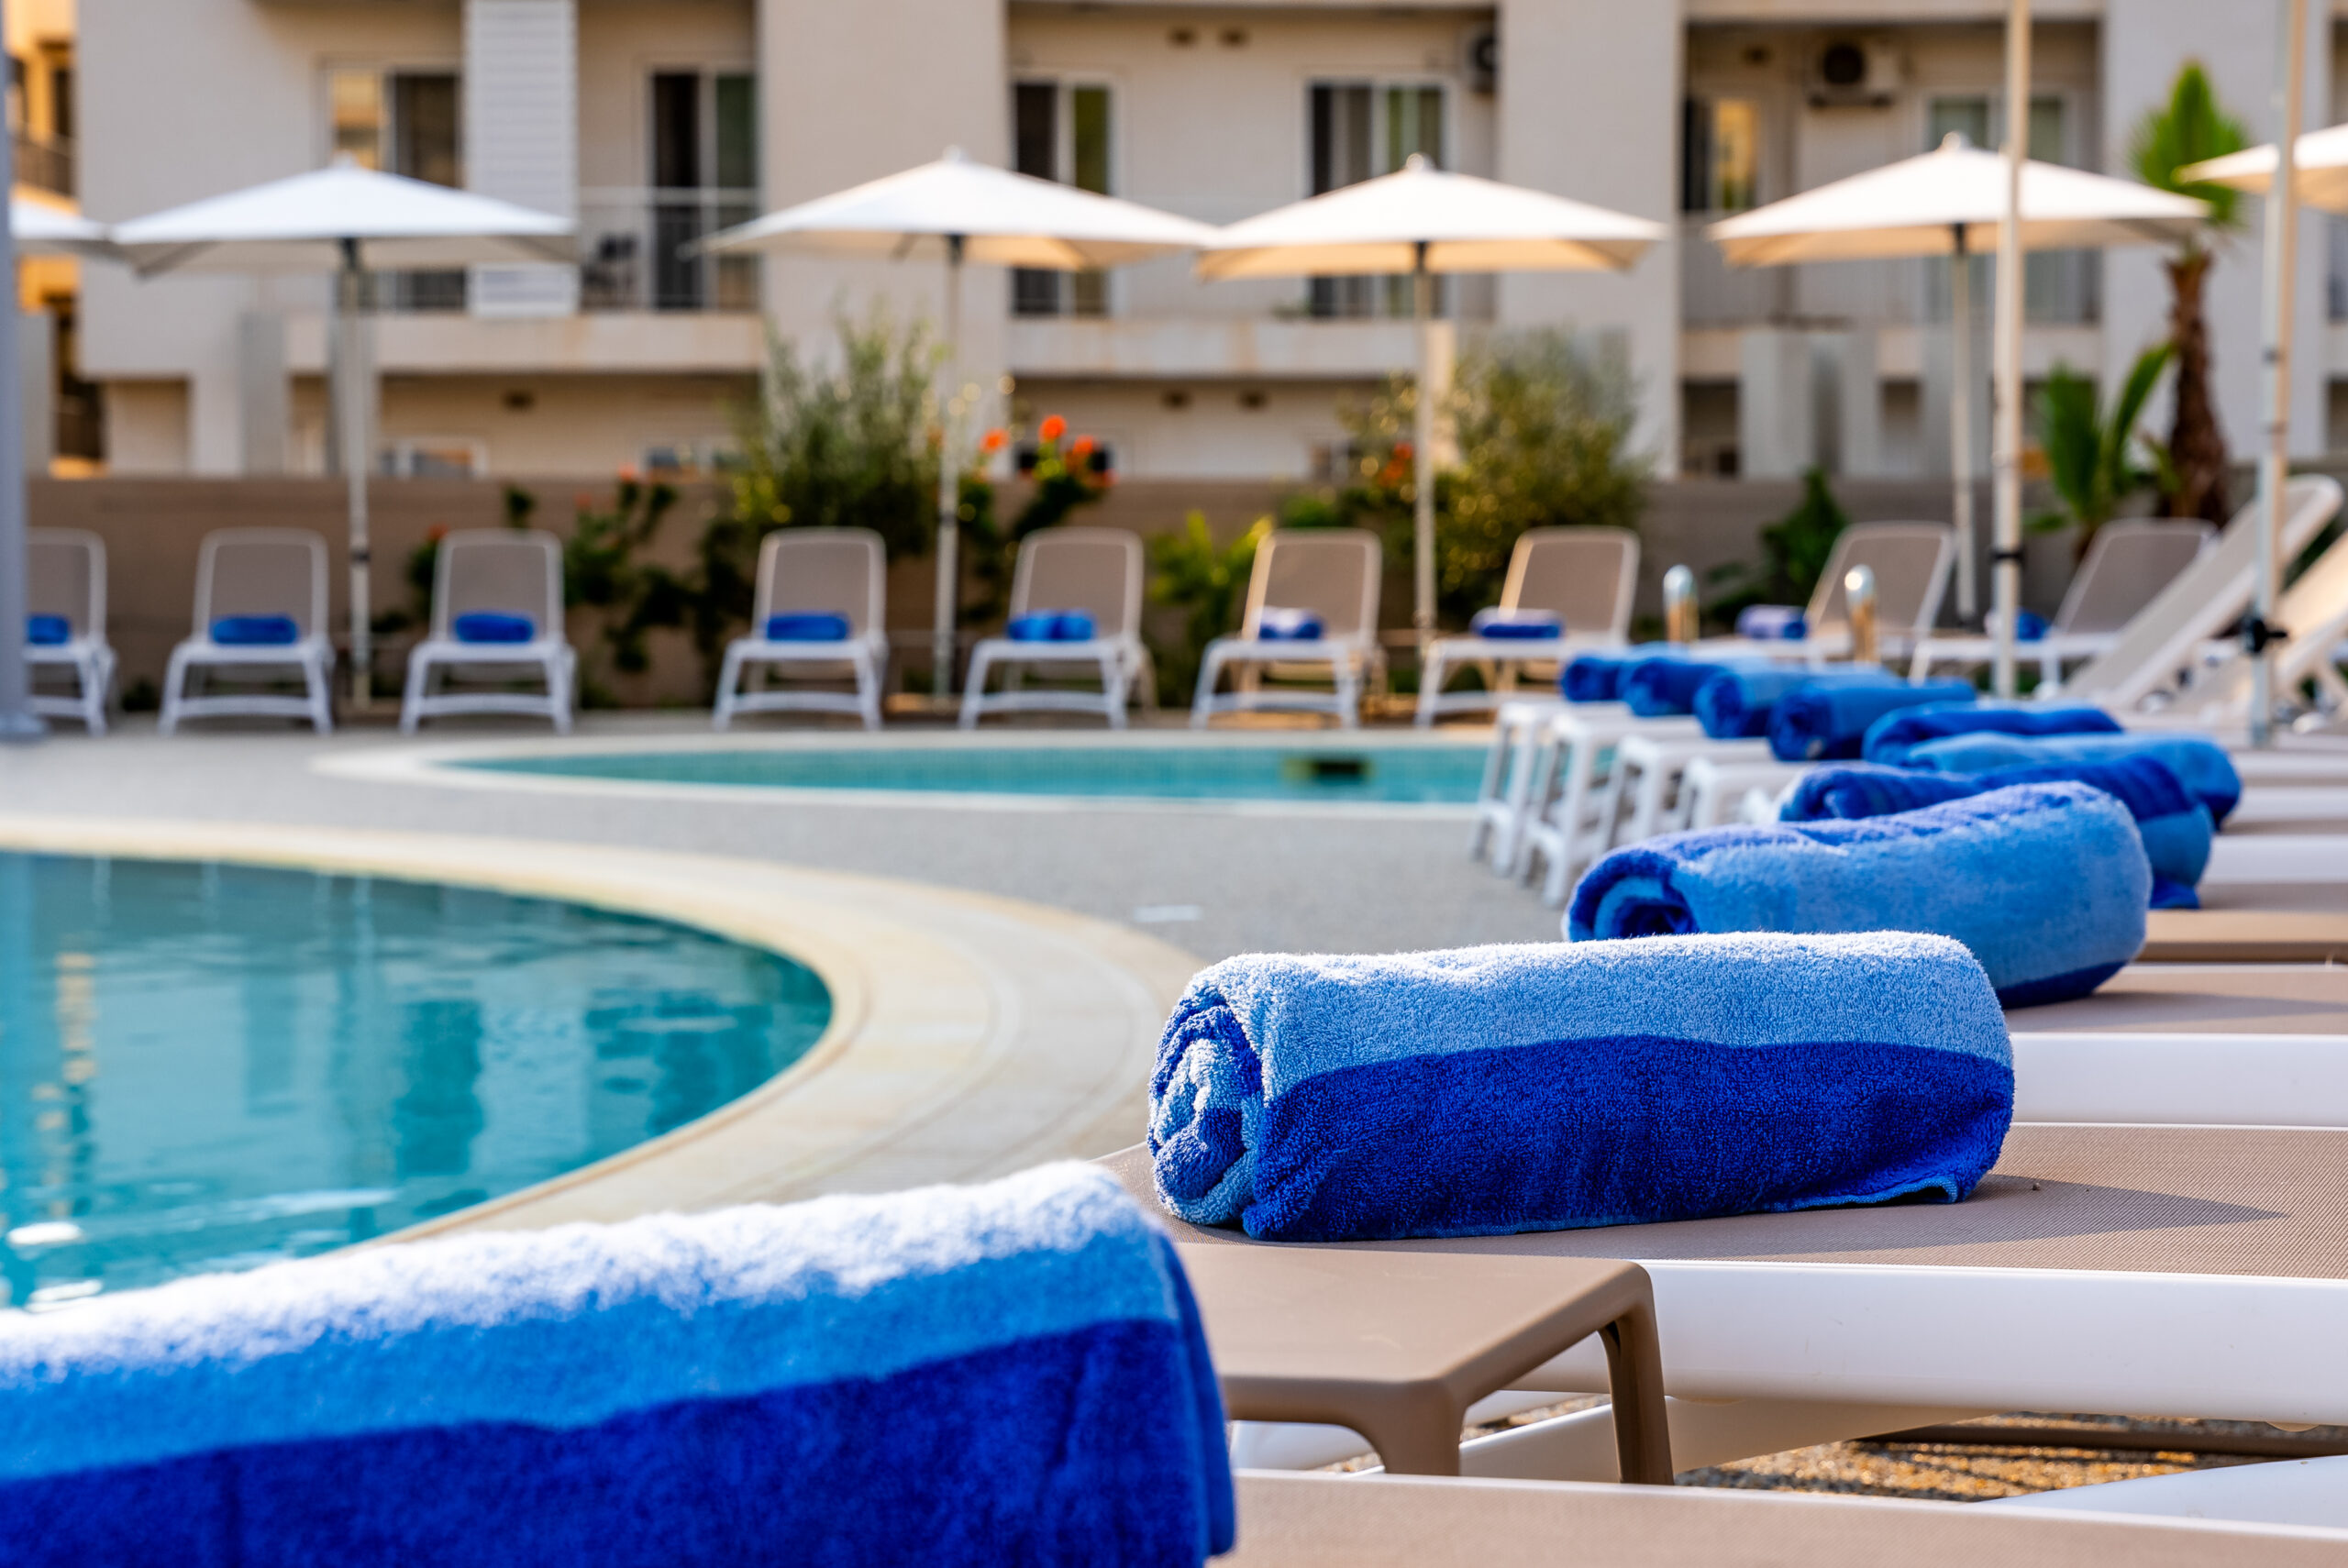 Deckchairs around a pool, with towels on them